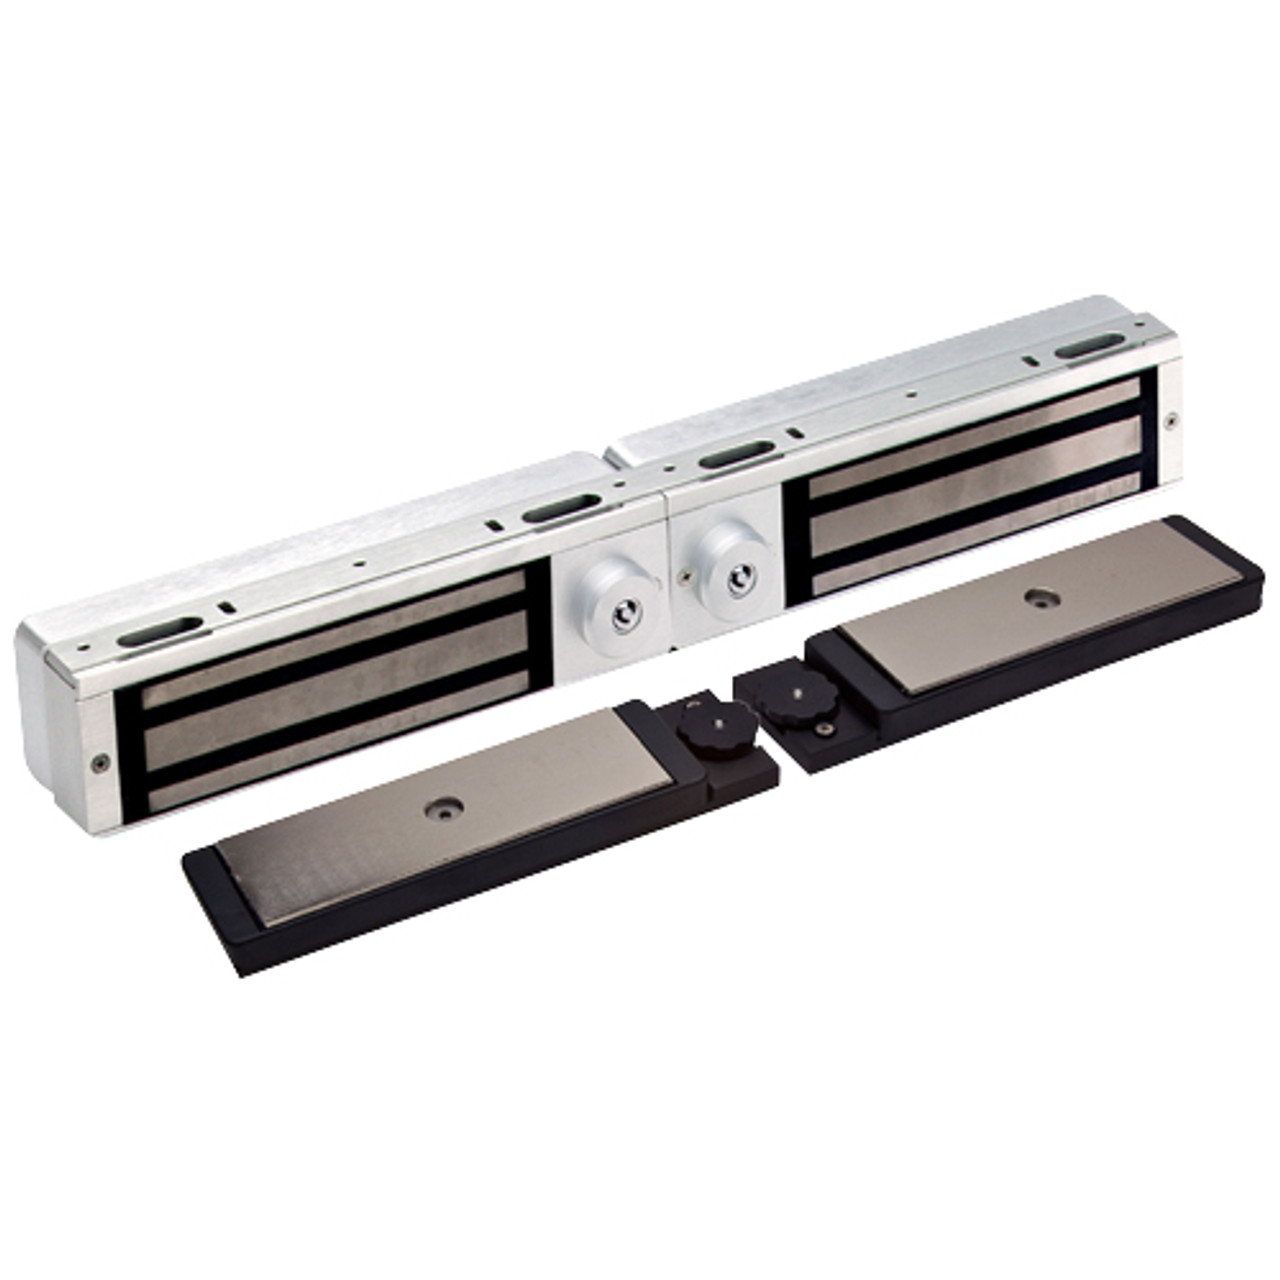 3121C-US26 DynaLock 3101C Series Delay Egress Electromagnetic Lock for Double Outswing Door in Bright Chrome